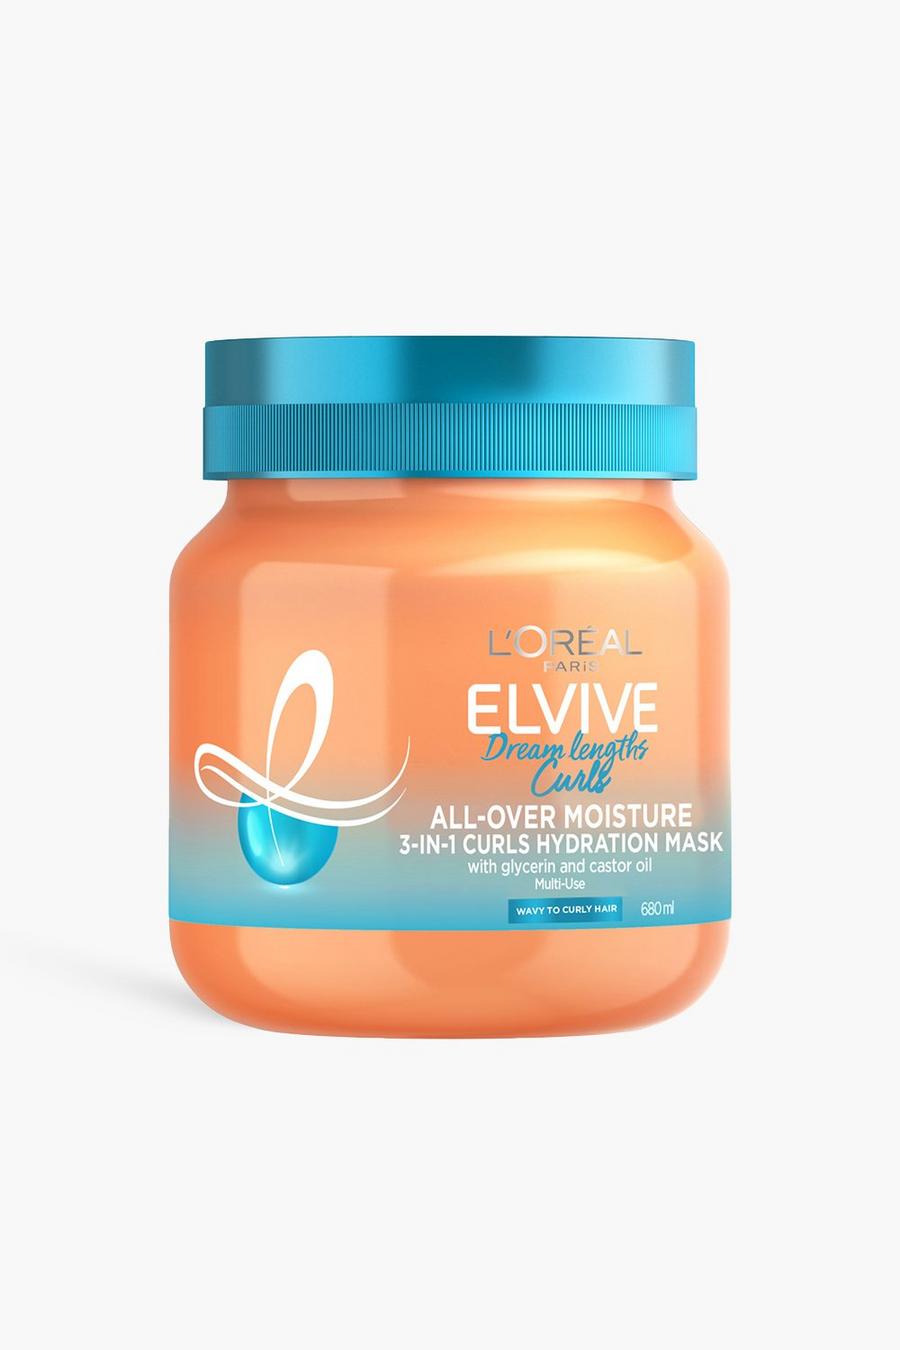 White L'Oreal Elvive Dream Lengths 3-in-1 Curls Hydration Mask, for wavy to curly hair